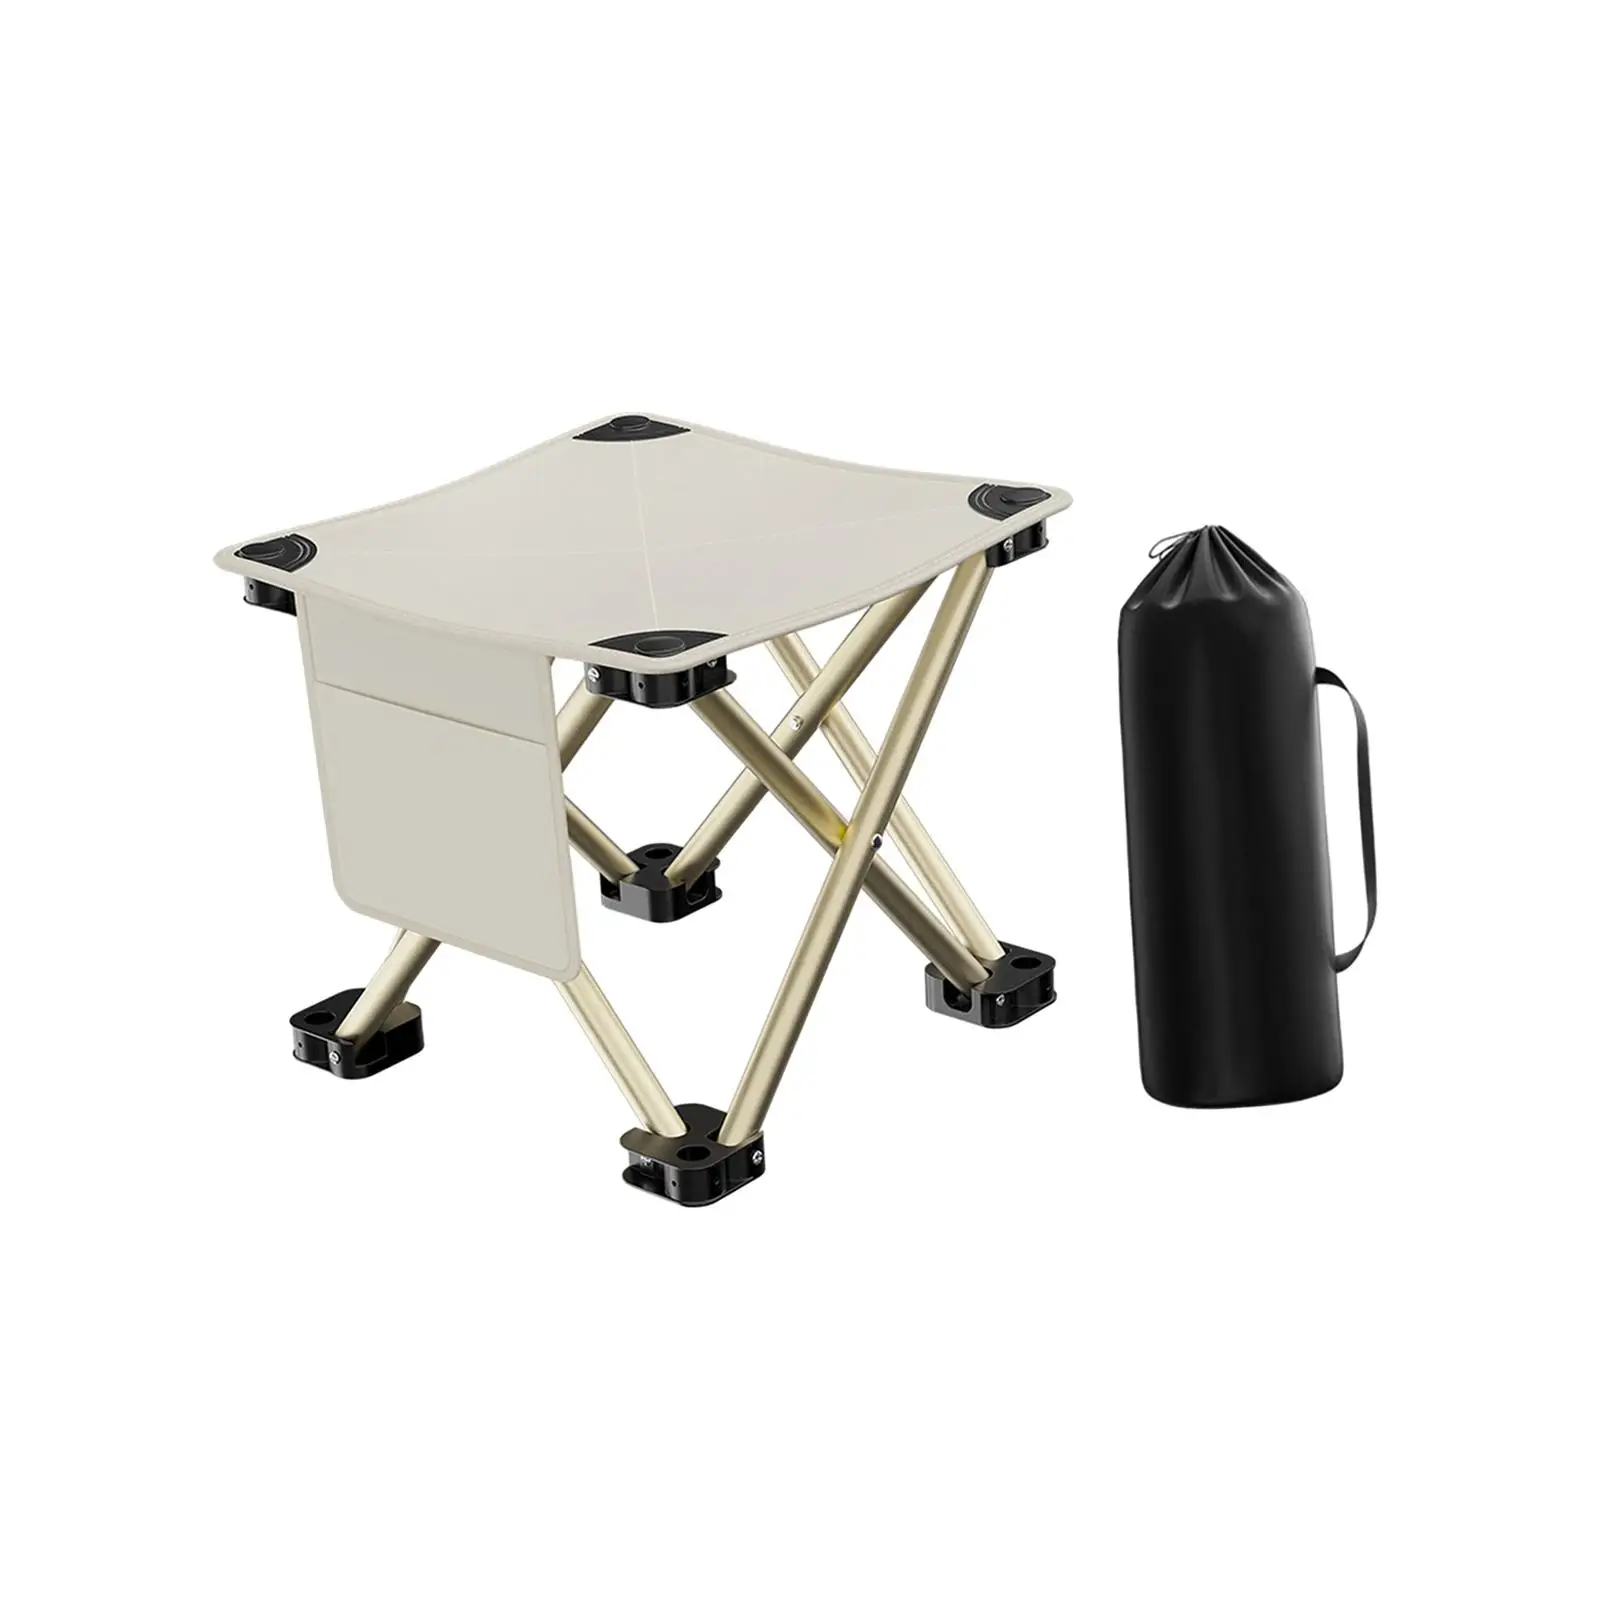 Camping Folding Stool Compact Fishing Chair Foot Rest Stable Portable Collapsible Stool for BBQ Outdoor Concert Hiking Festival